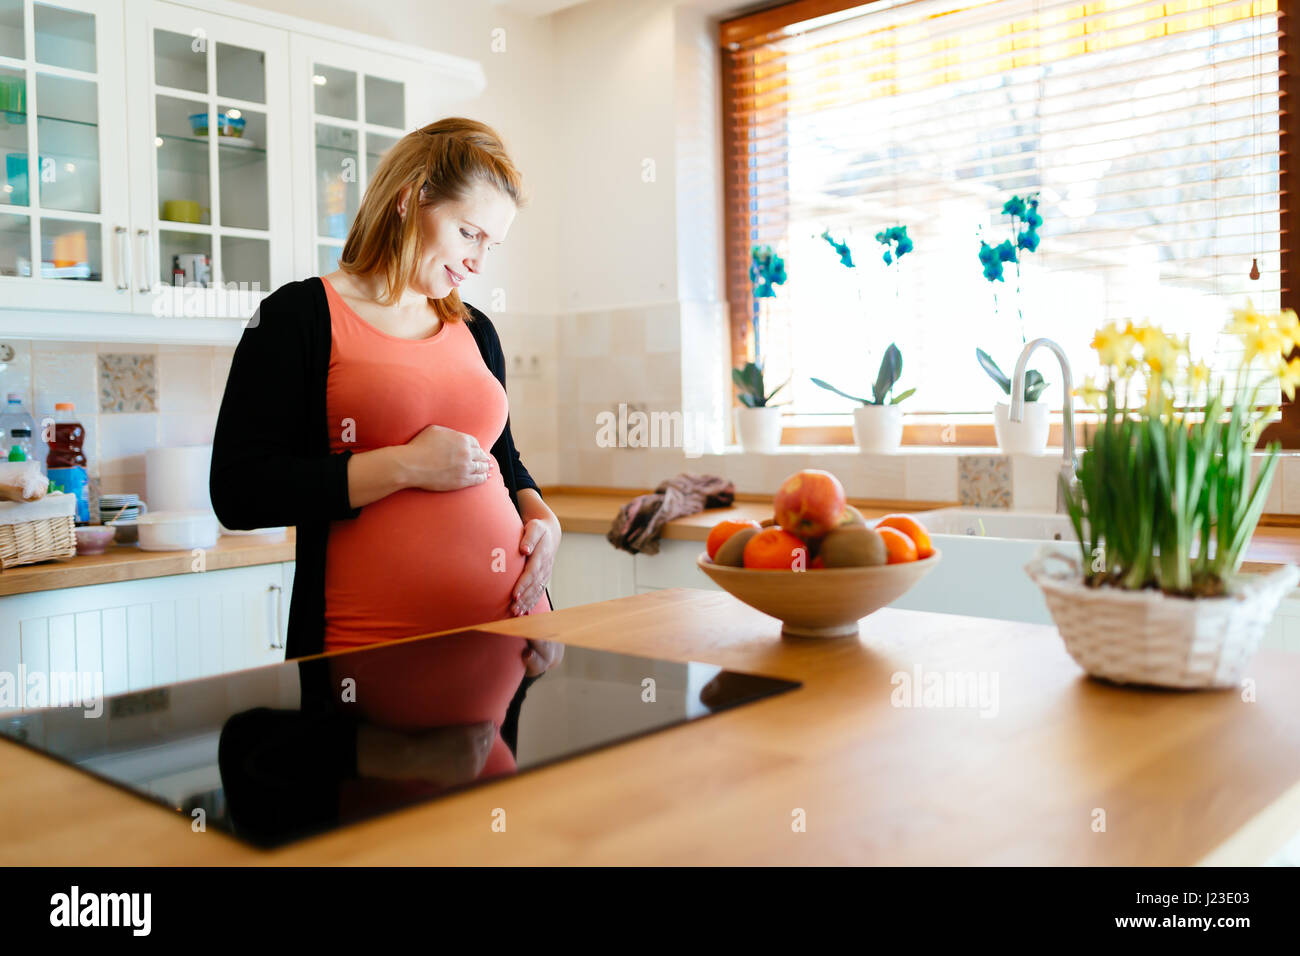 Beautiful pregnant woman in kitchen holding her belly Stock Photo